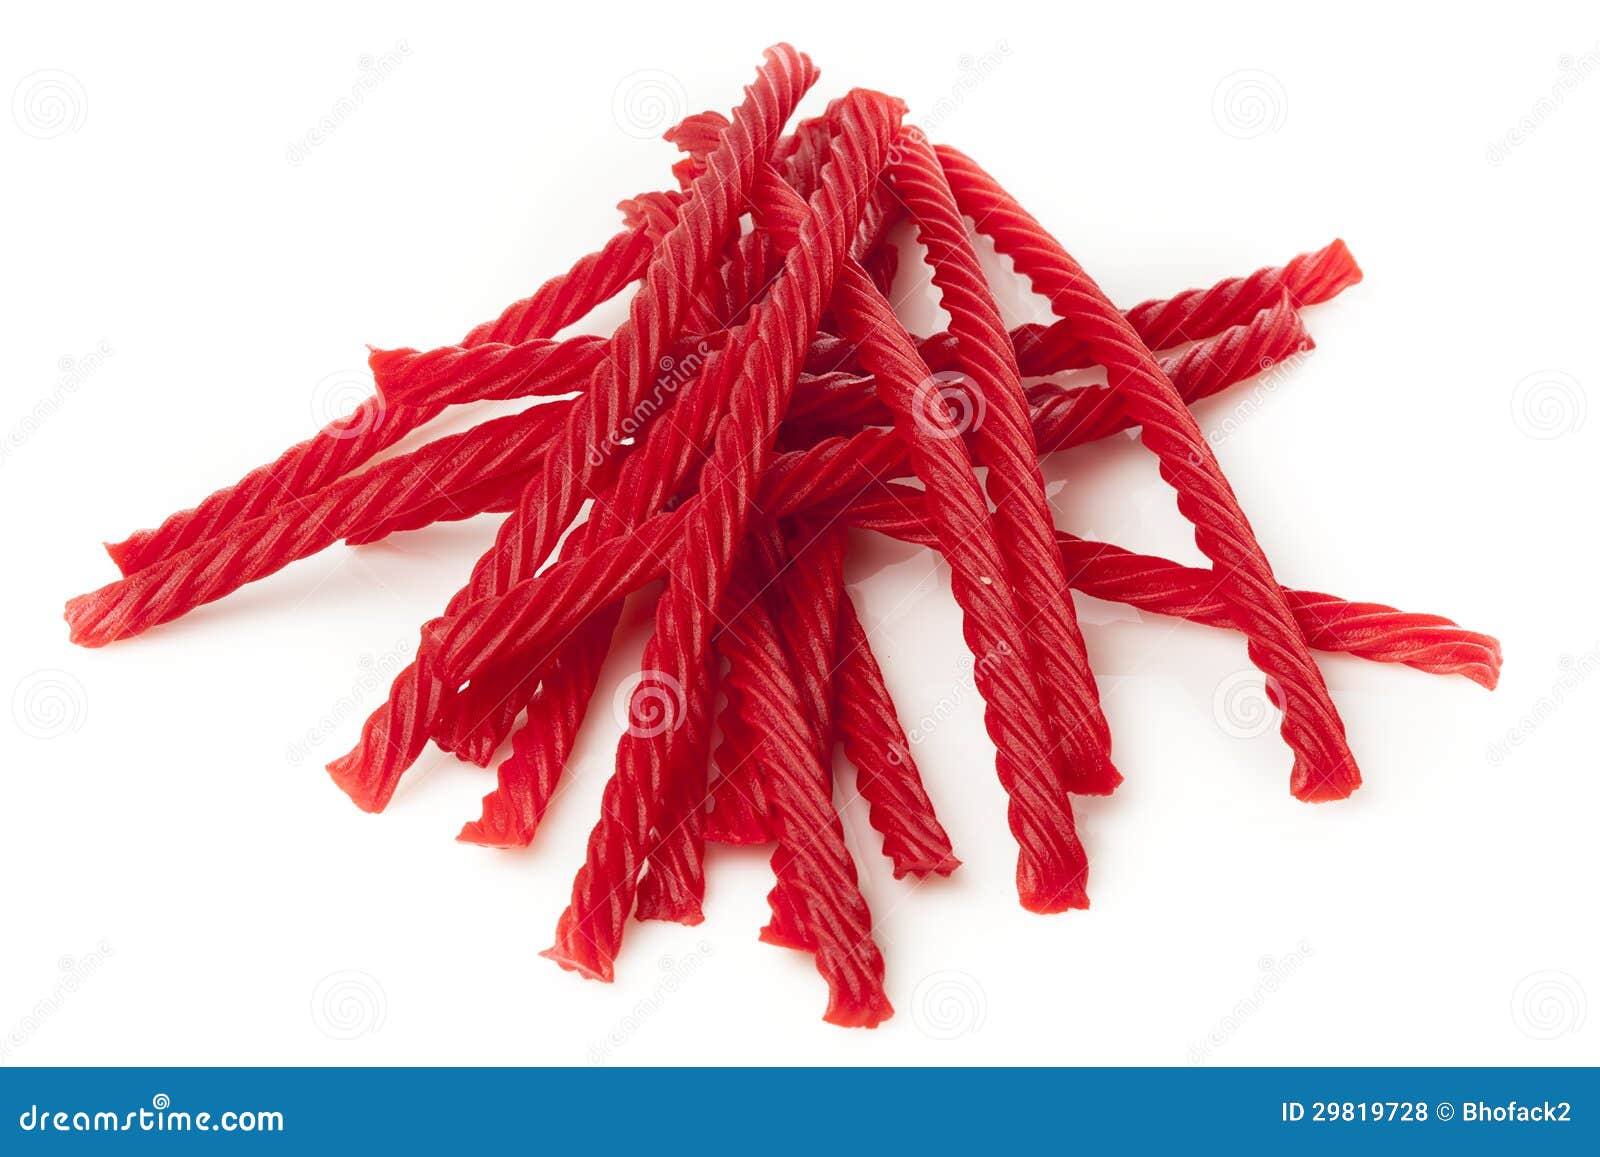 Bright Red Licorice Candy stock photo. Image of yummy - 29819728